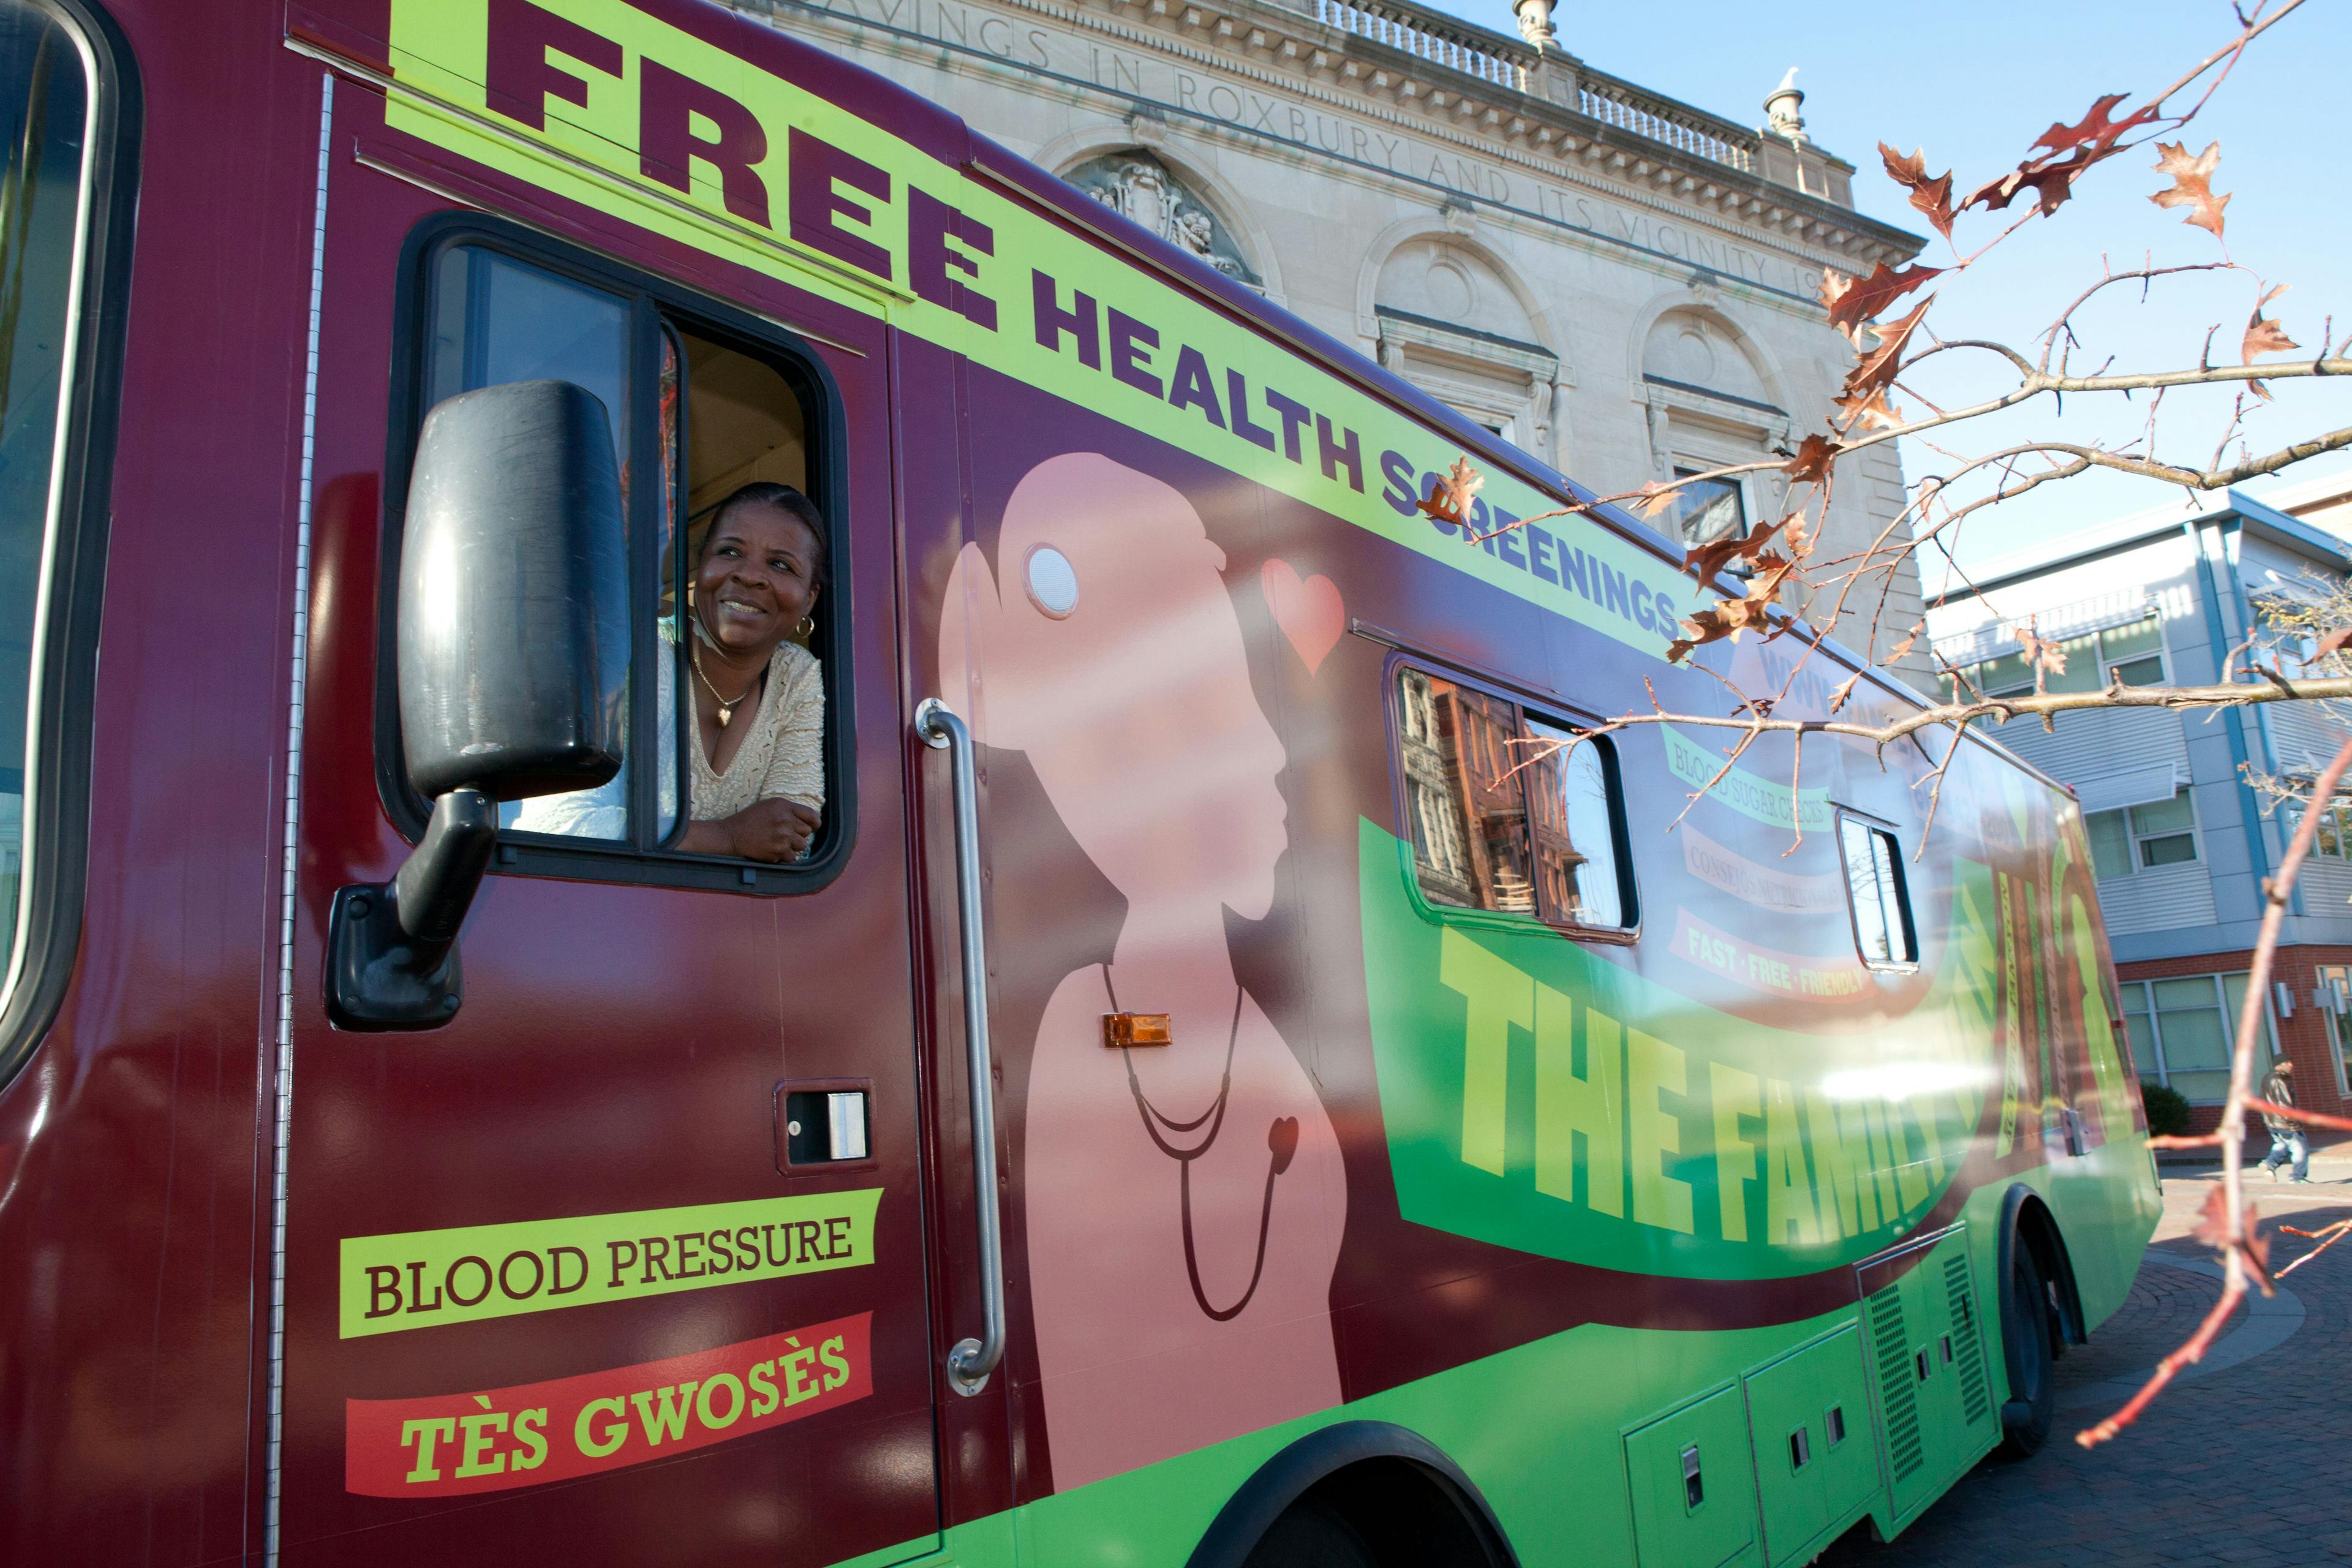 Harvard Medical School's Family Van, which provides healthcare and screenings in Boston.